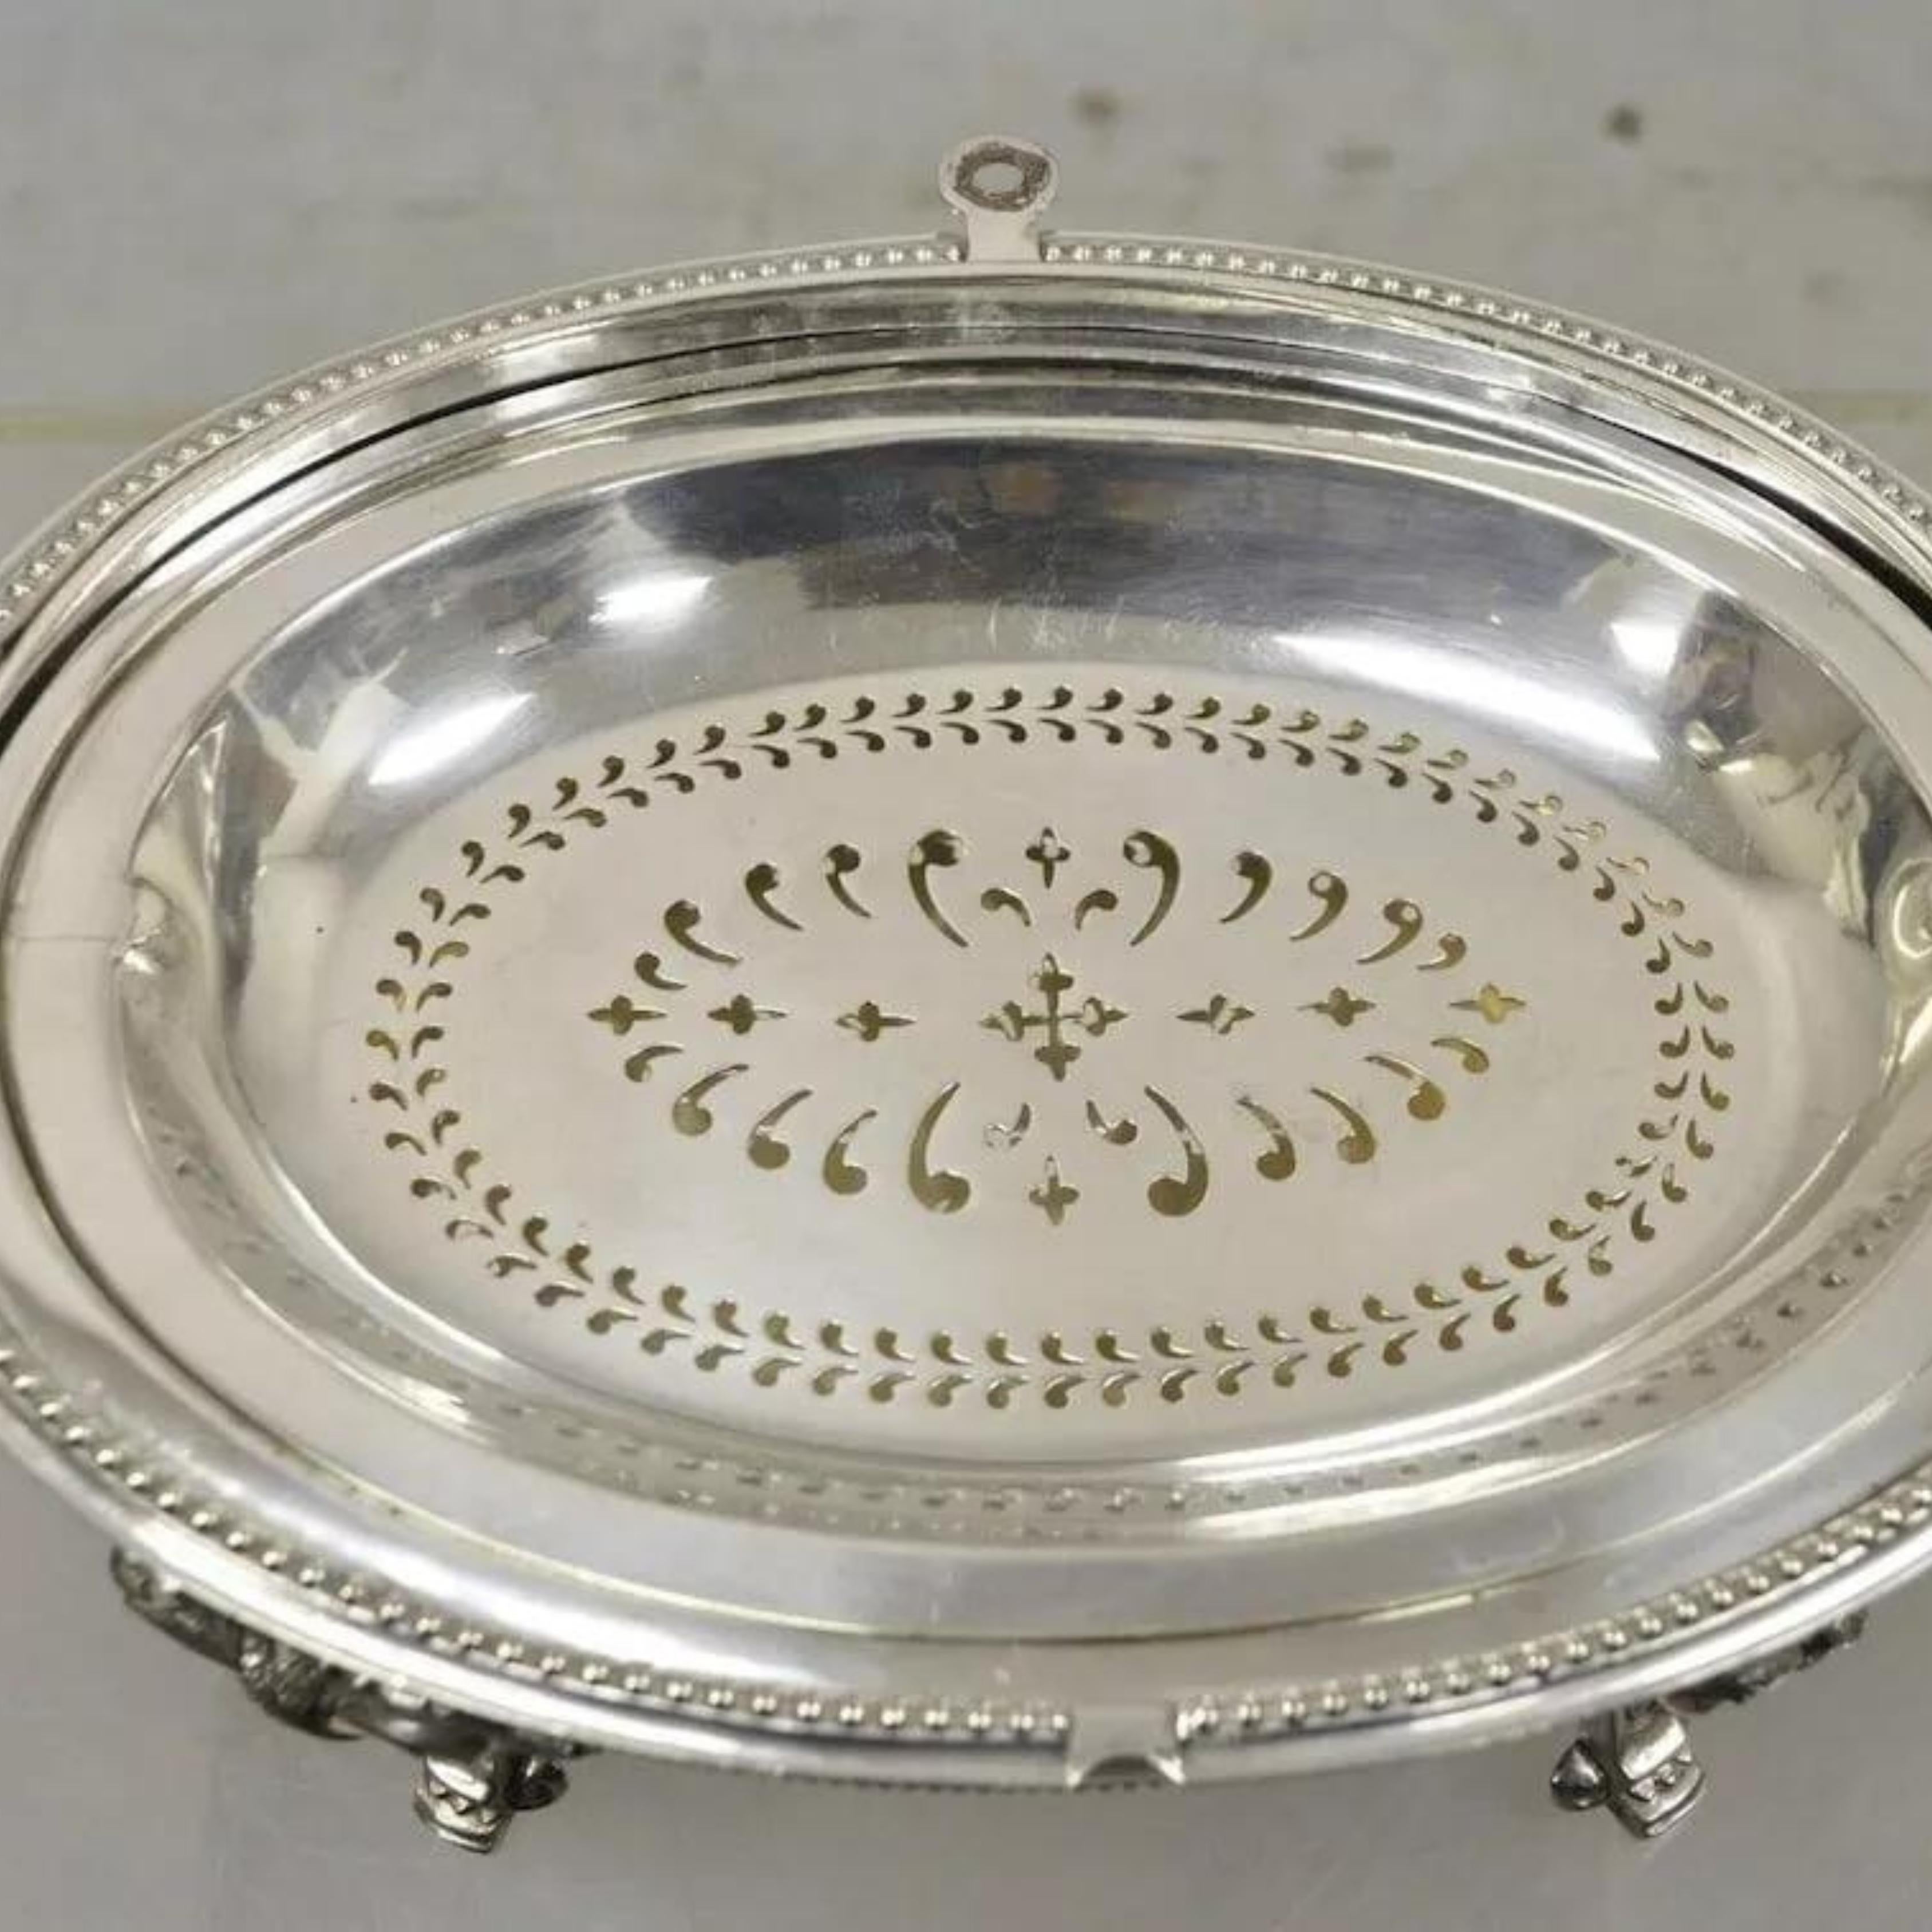 Antique Edwardian Silver Plated Revolving Dome Oval Chafing Dish Food Warmer For Sale 2